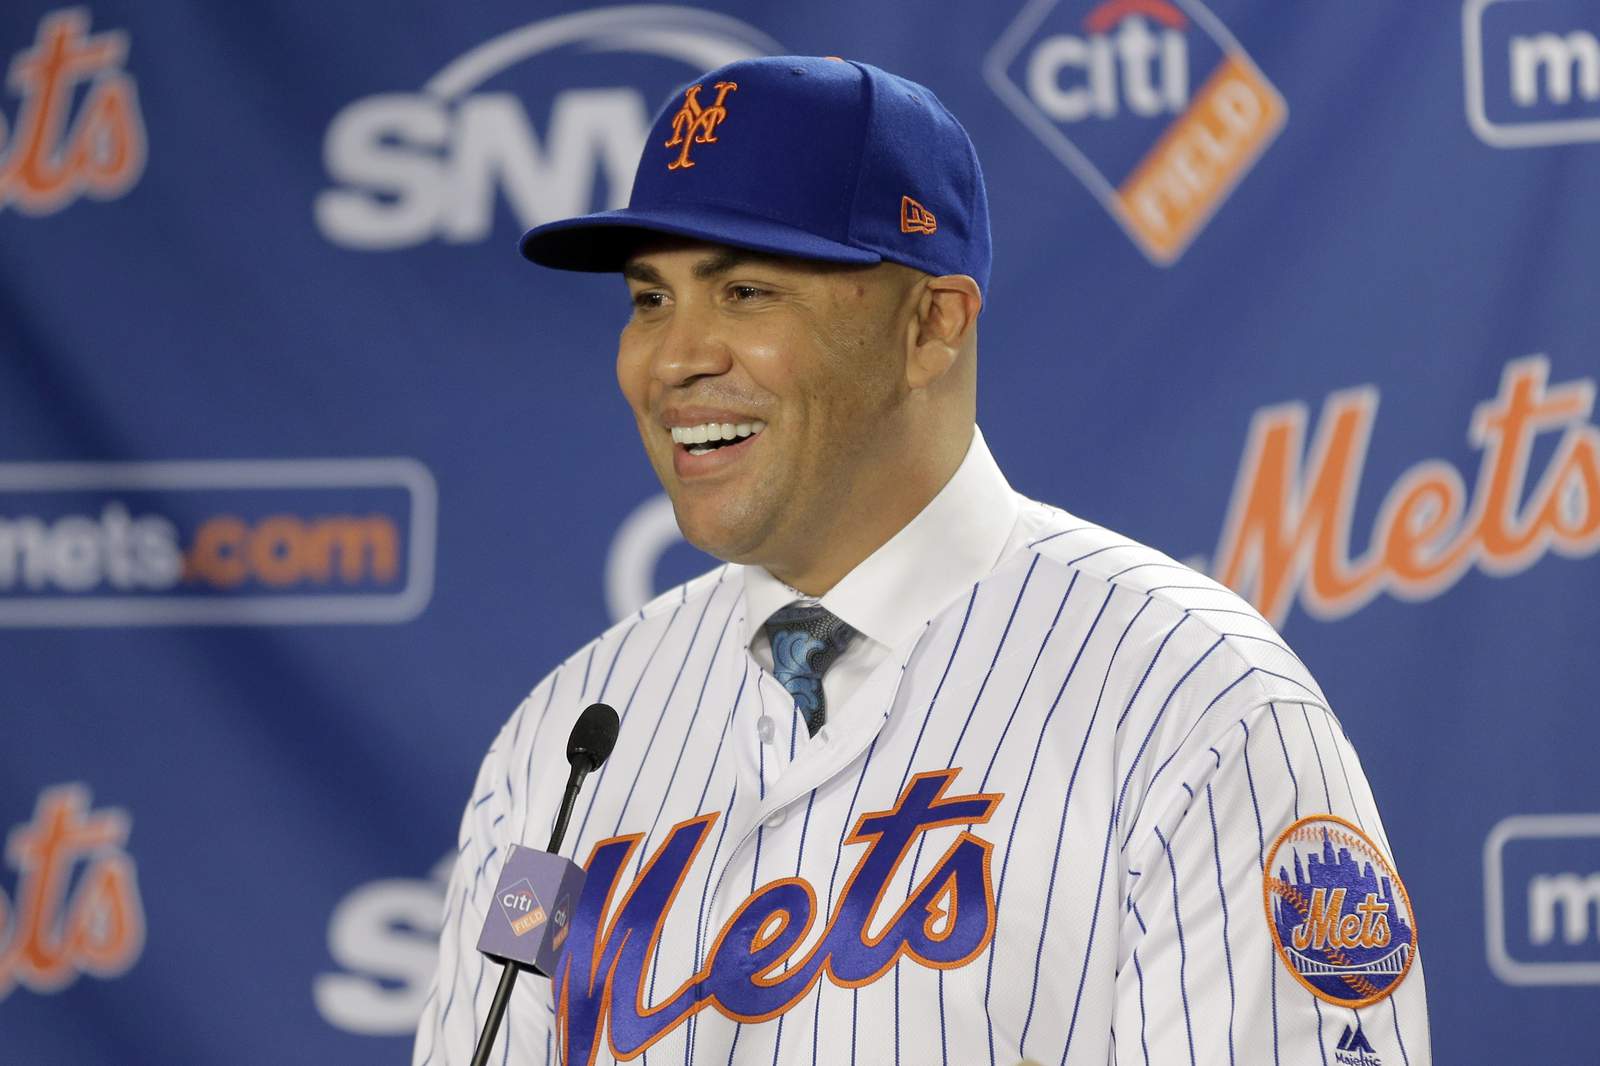 Carlos Beltran out as New York Mets manager without coaching a single game due to cheating scandal